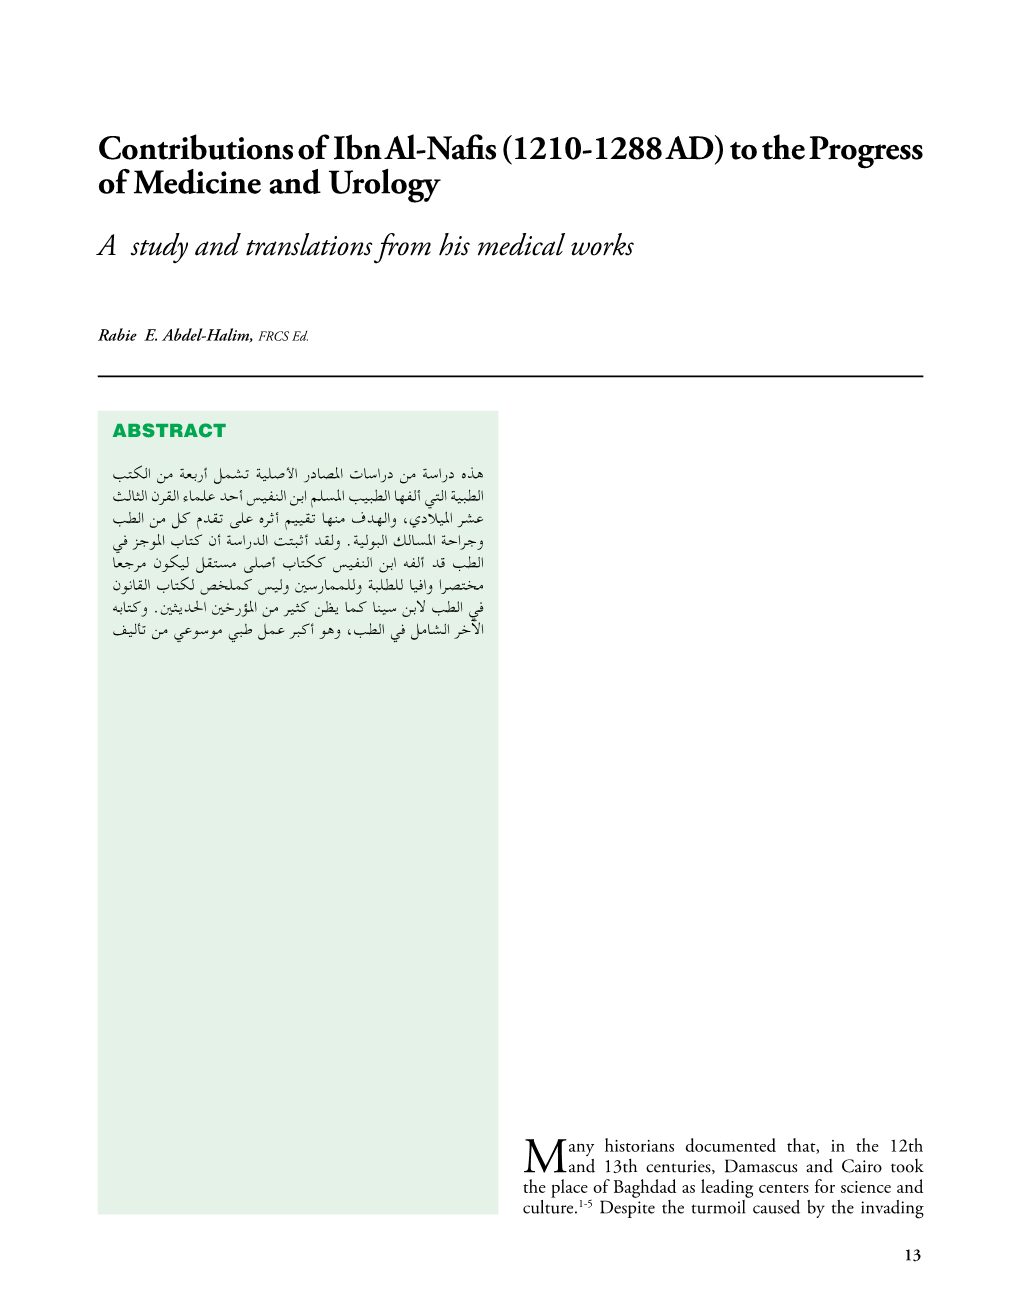 Contributions of Ibn Al-Nafis (1210-1288 AD) to the Progress of Medicine and Urology